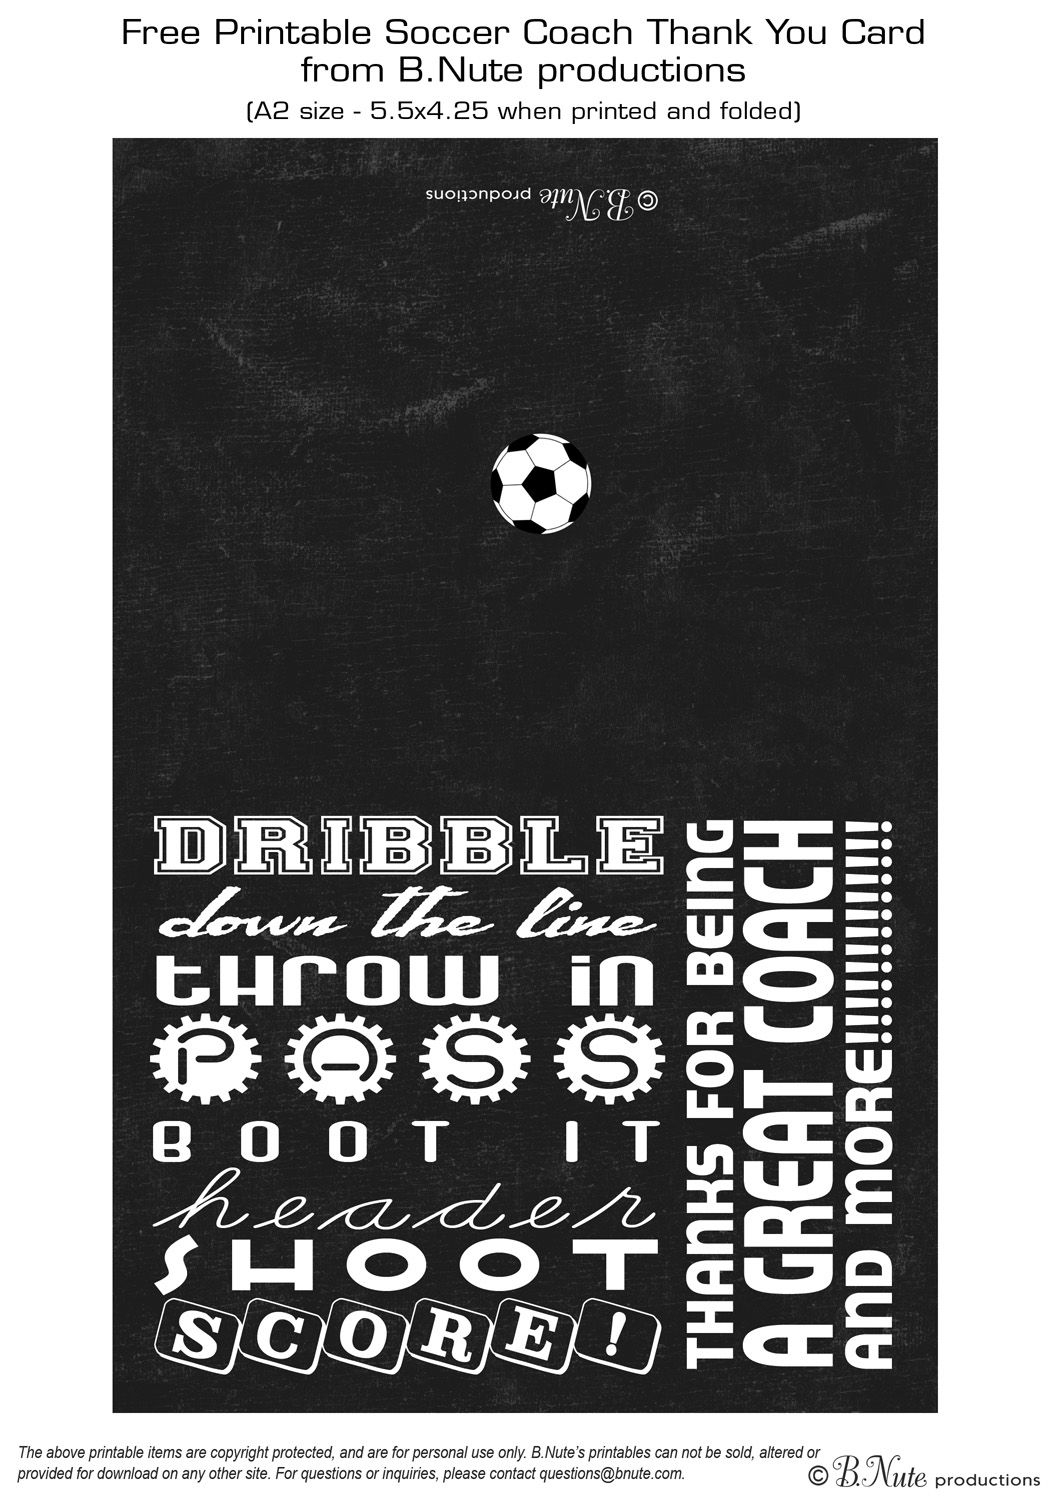 Free Printable Soccer Coach Thank You Card From B.nute Productions - Administrative Professionals Cards Printable Free